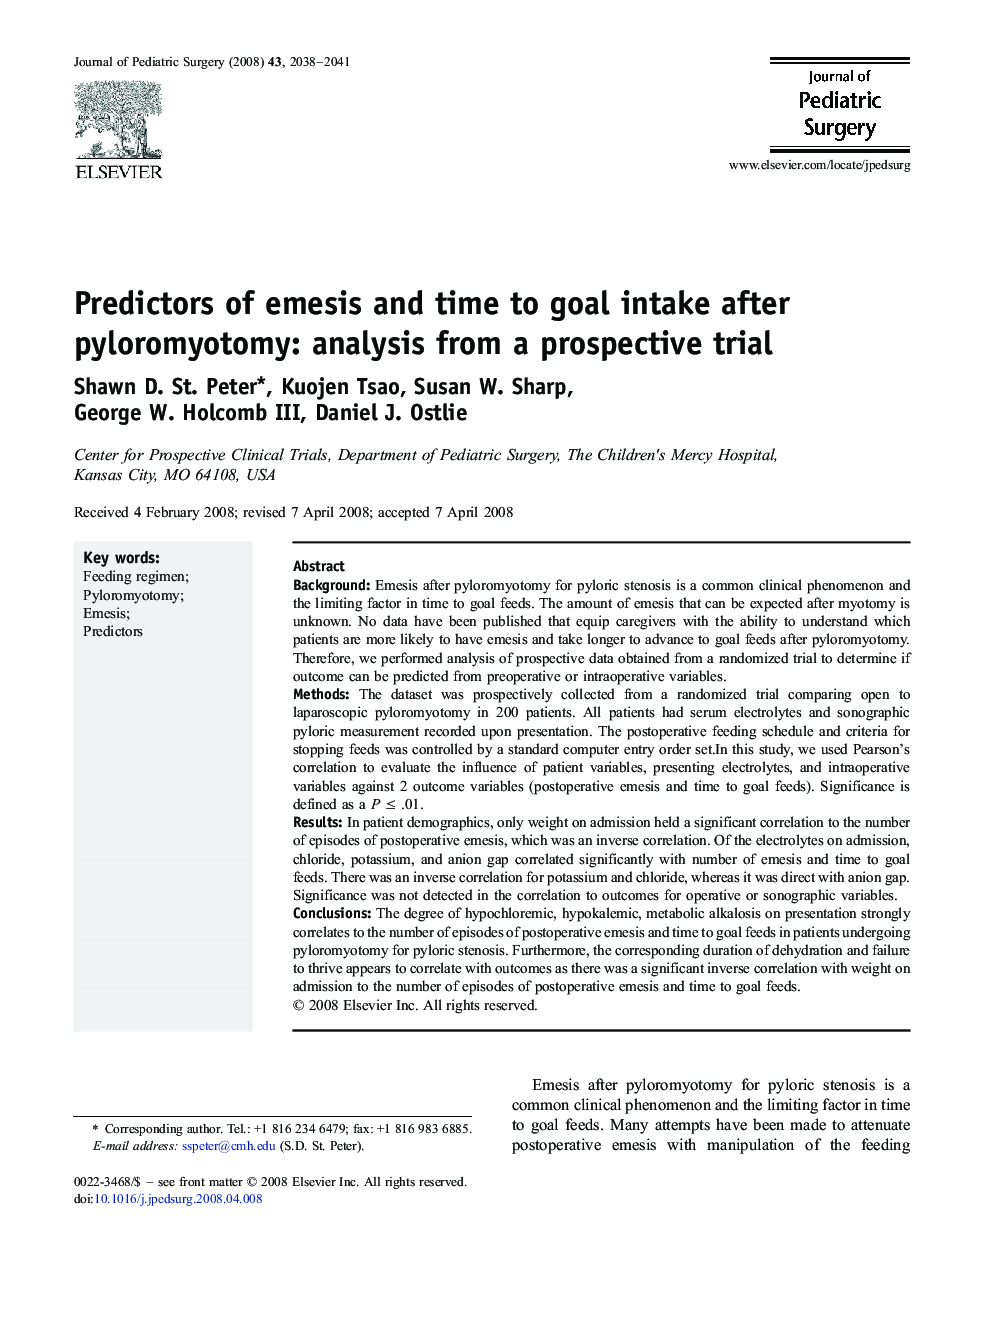 Predictors of emesis and time to goal intake after pyloromyotomy: analysis from a prospective trial